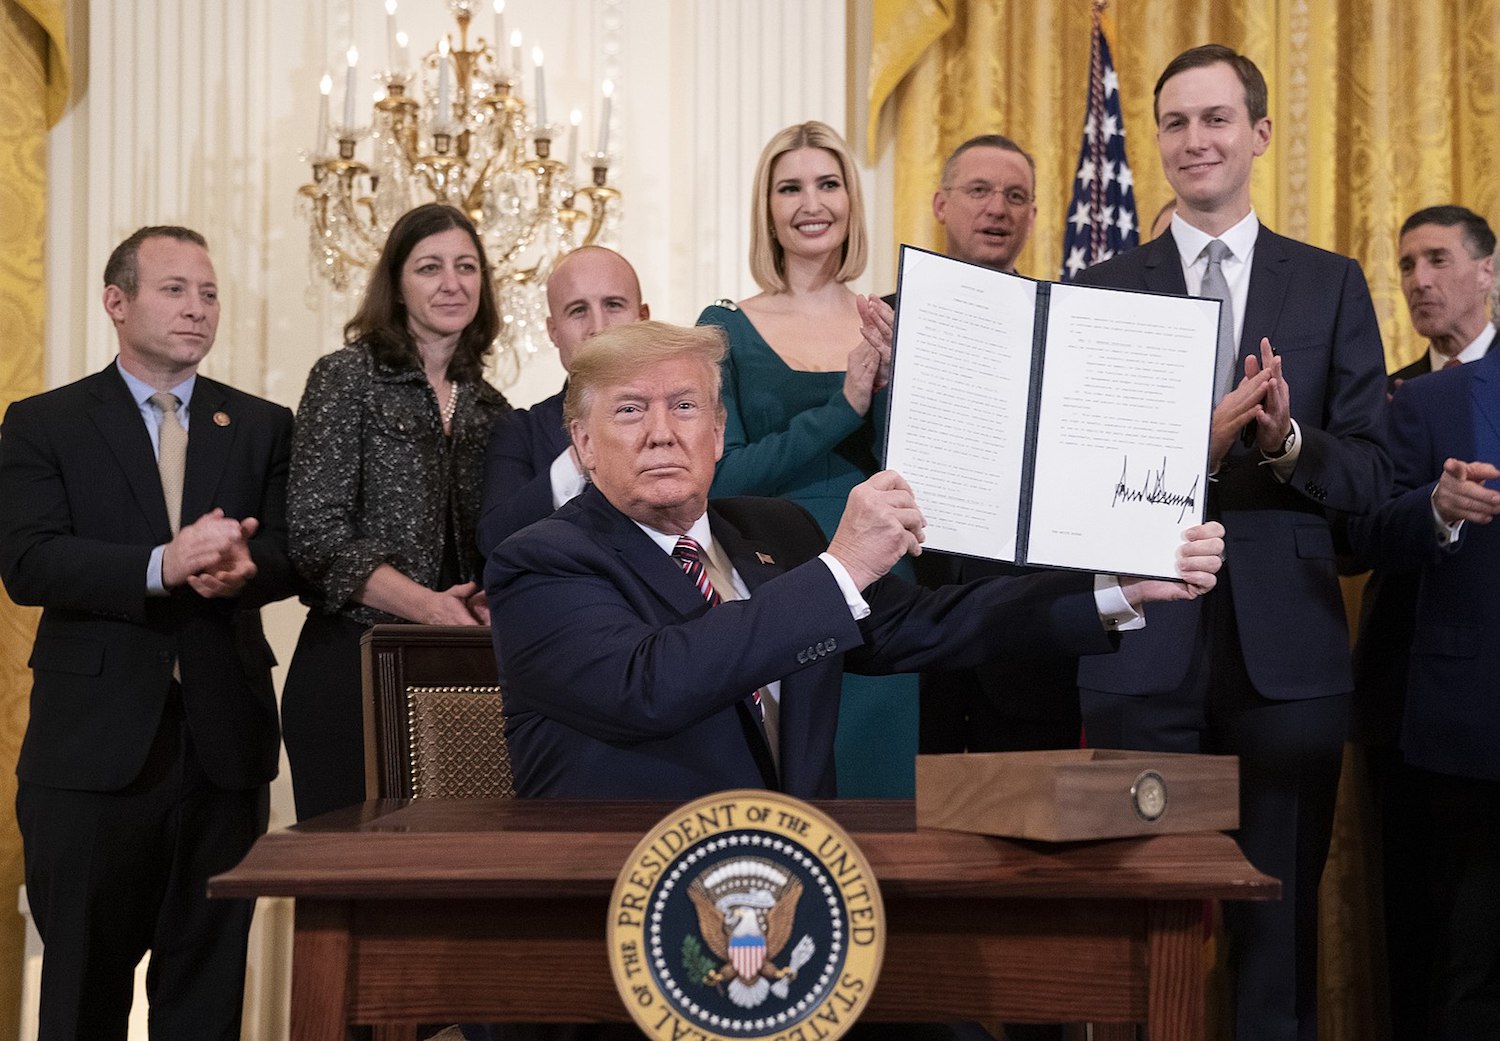 President Trump displays the controversial Executive Order on Combating Anti-Semitism during an afternoon Hanukkah reception alongside members of his administration, including son-in-law Jared Kushner, in the White House, December 11, 2019. (Joyce N. Boghosian/White House Photo)